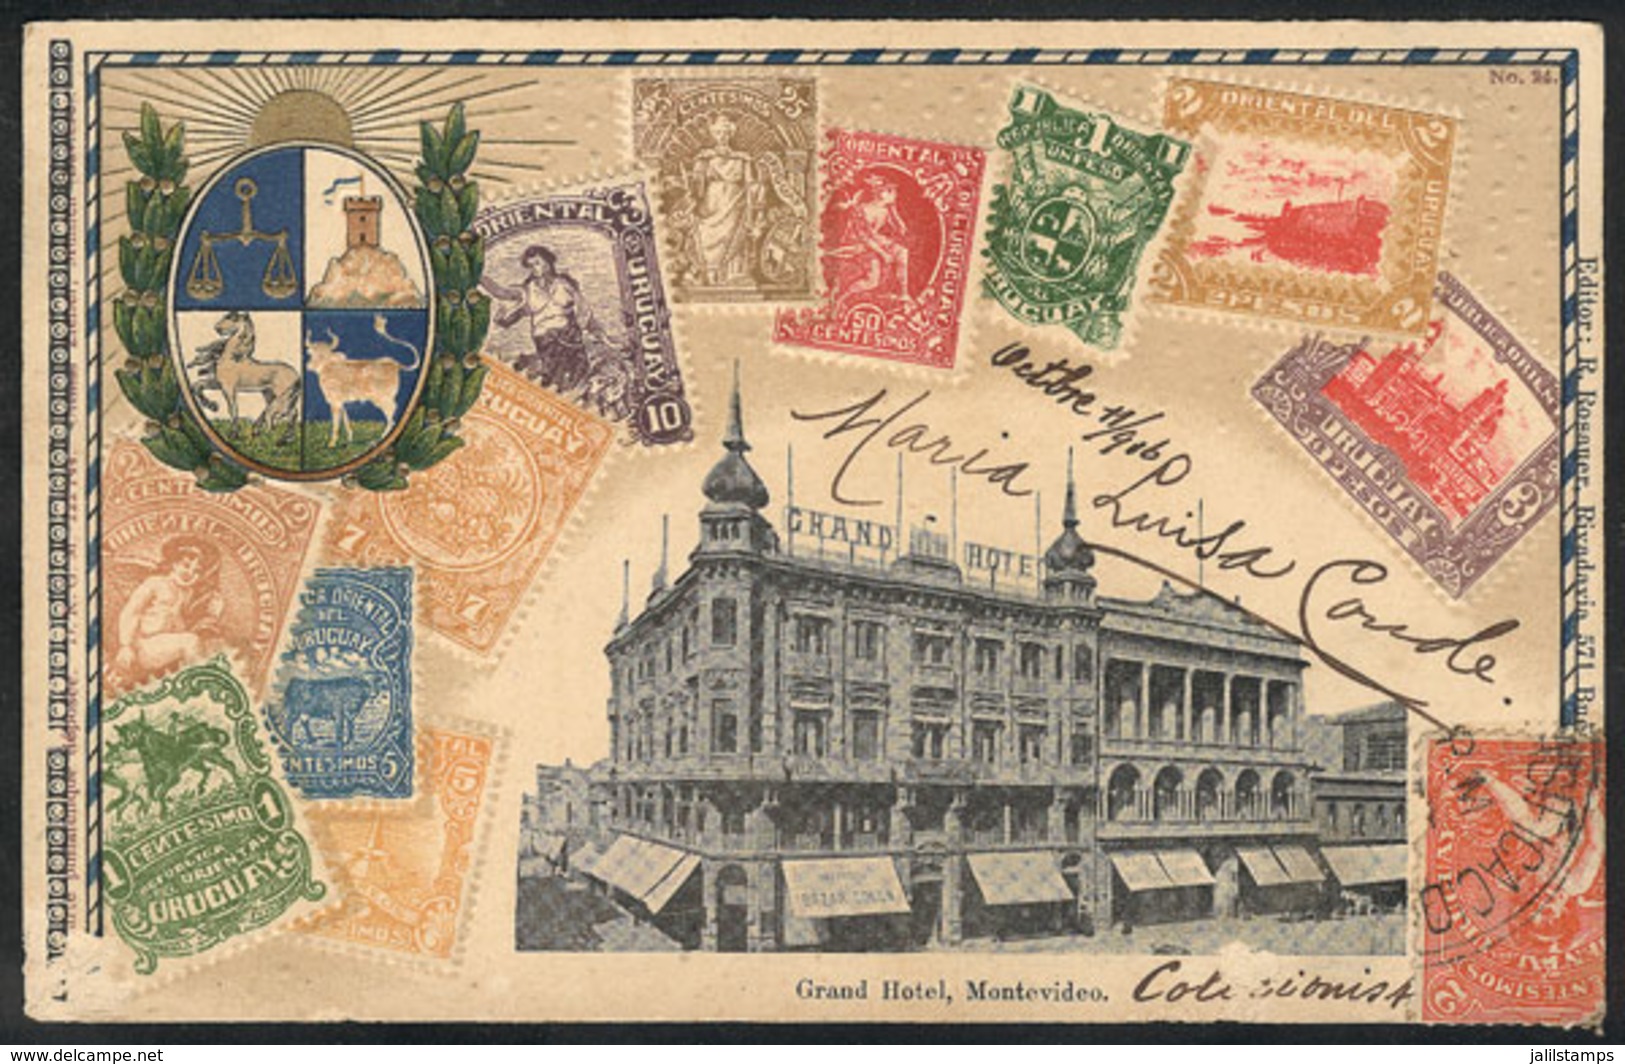 URUGUAY: Montevideo: Grand Hotel, Postage Stamps And Coat Of Arms. Sent To Argentina In 1916, VF Quality, Rare! - Uruguay